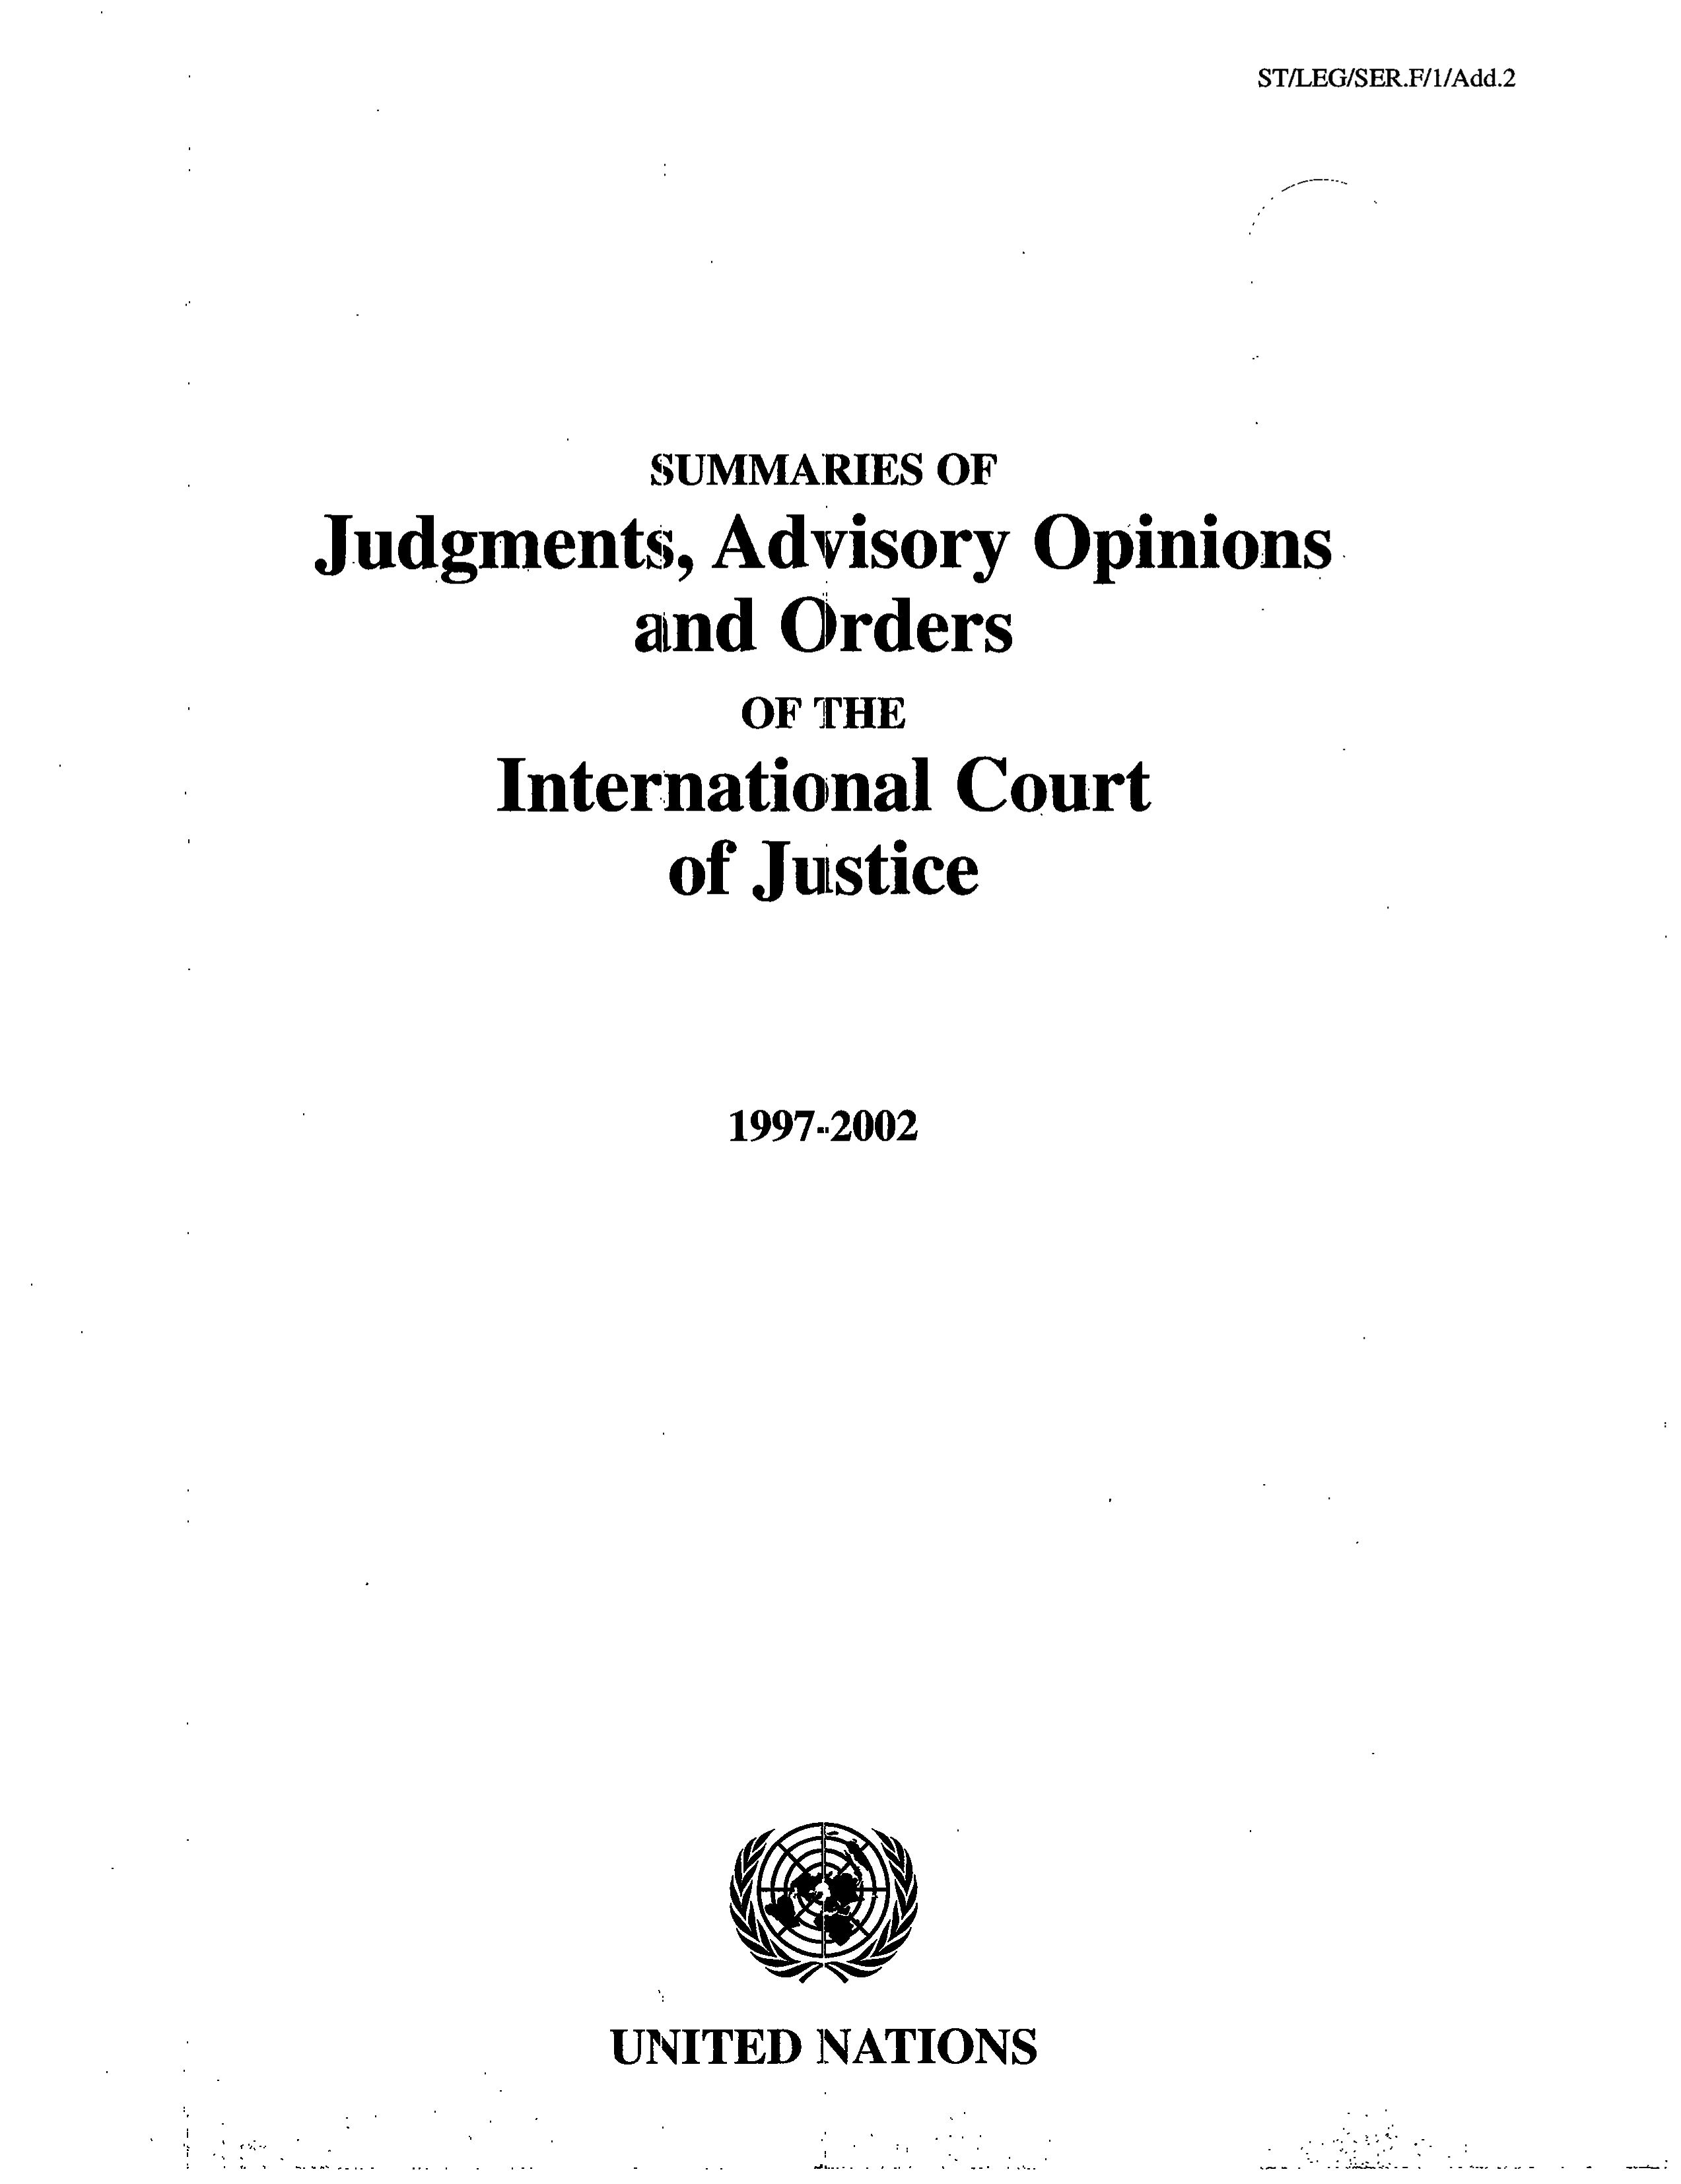 image of Maritime delimitation and territorial questions between Qatar and Bahrain (Qatar v. Bahrain) (merits) judgment of 16 March 2001